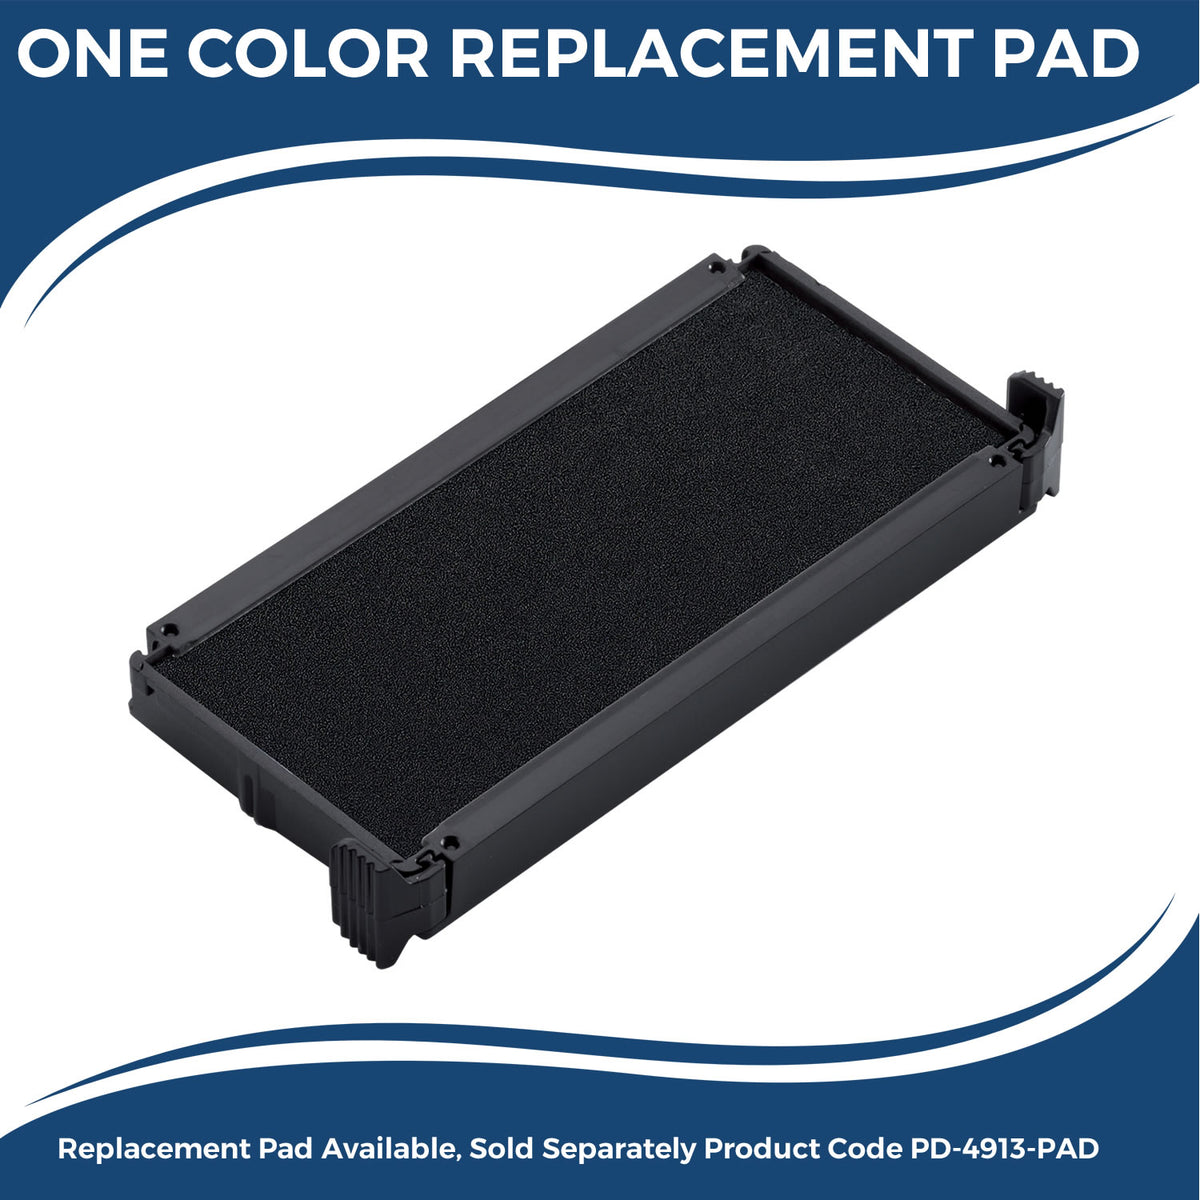 Large Self Inking Preliminary As Built Stamp 4145S Large Replacment Pad